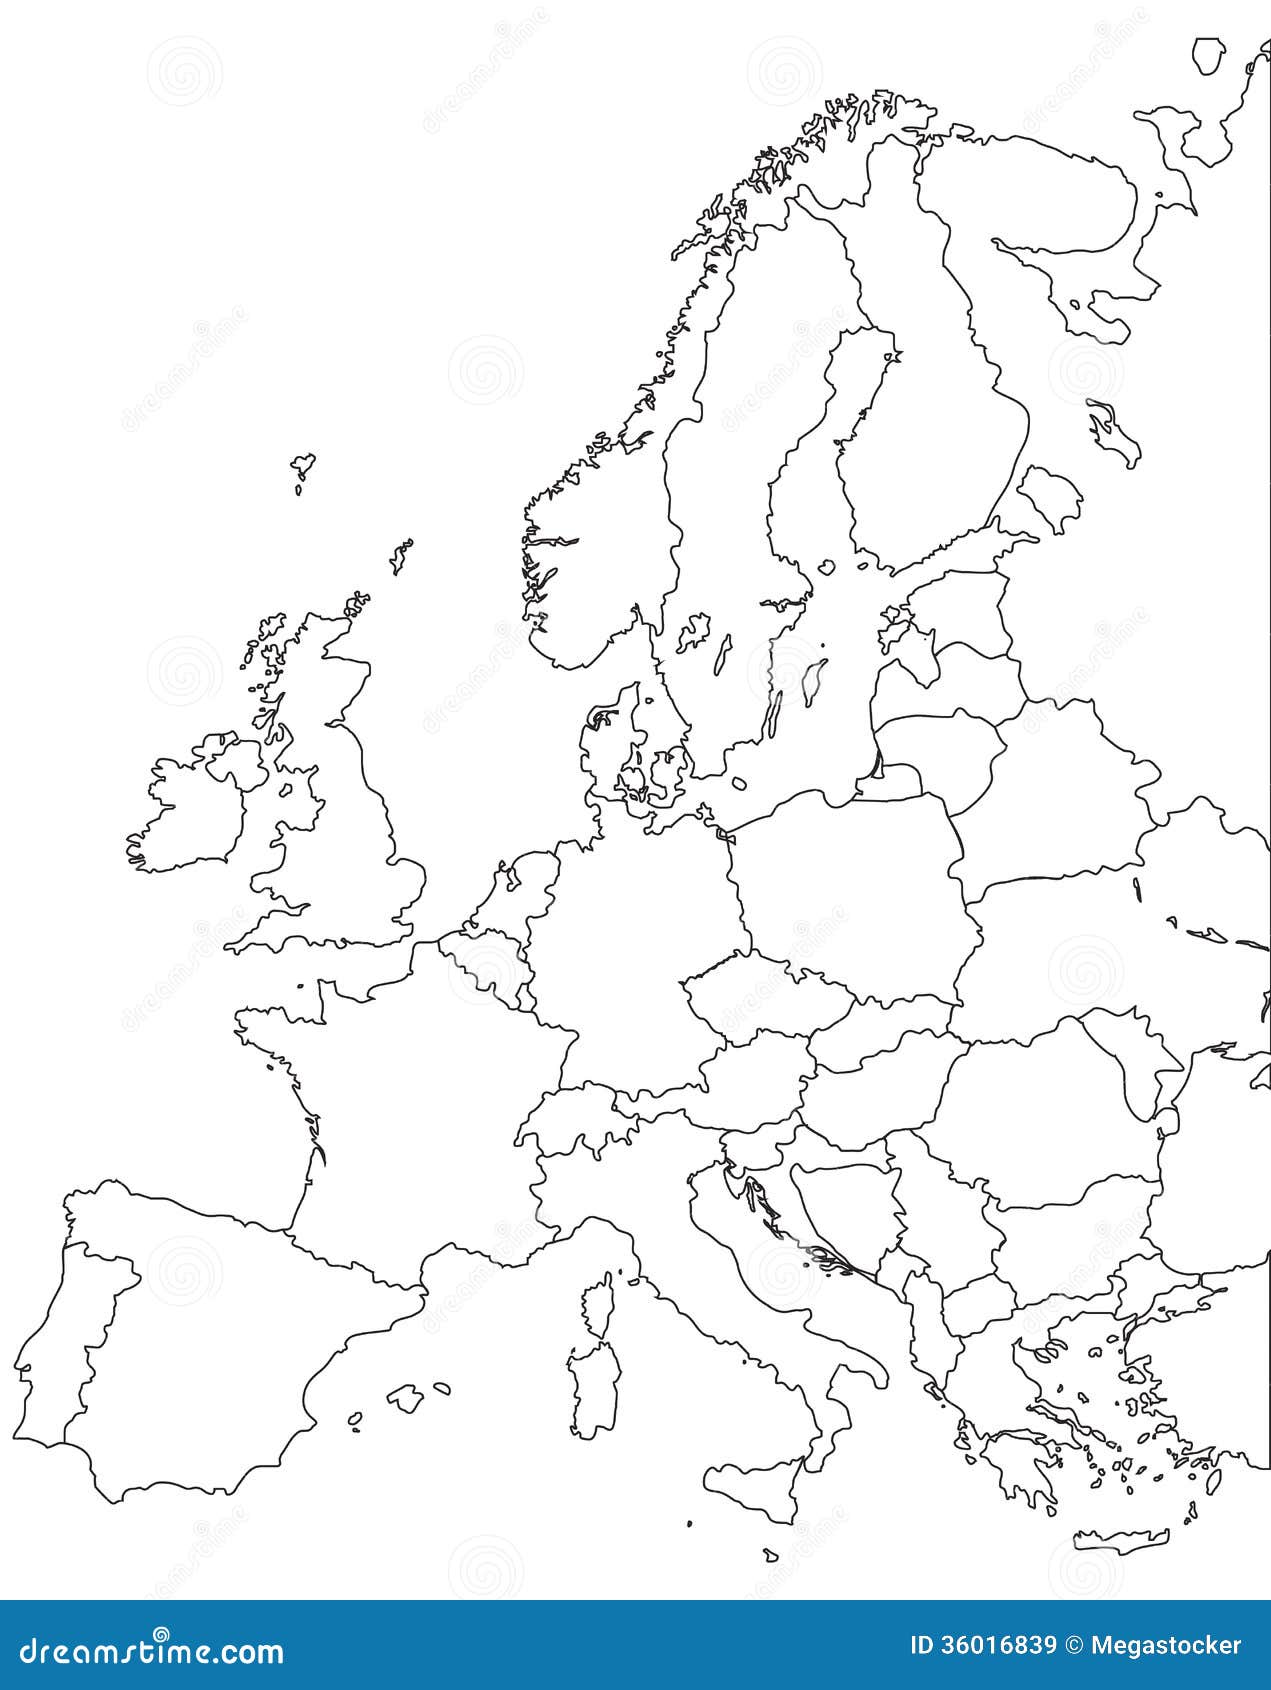 clipart map of europe - photo #45